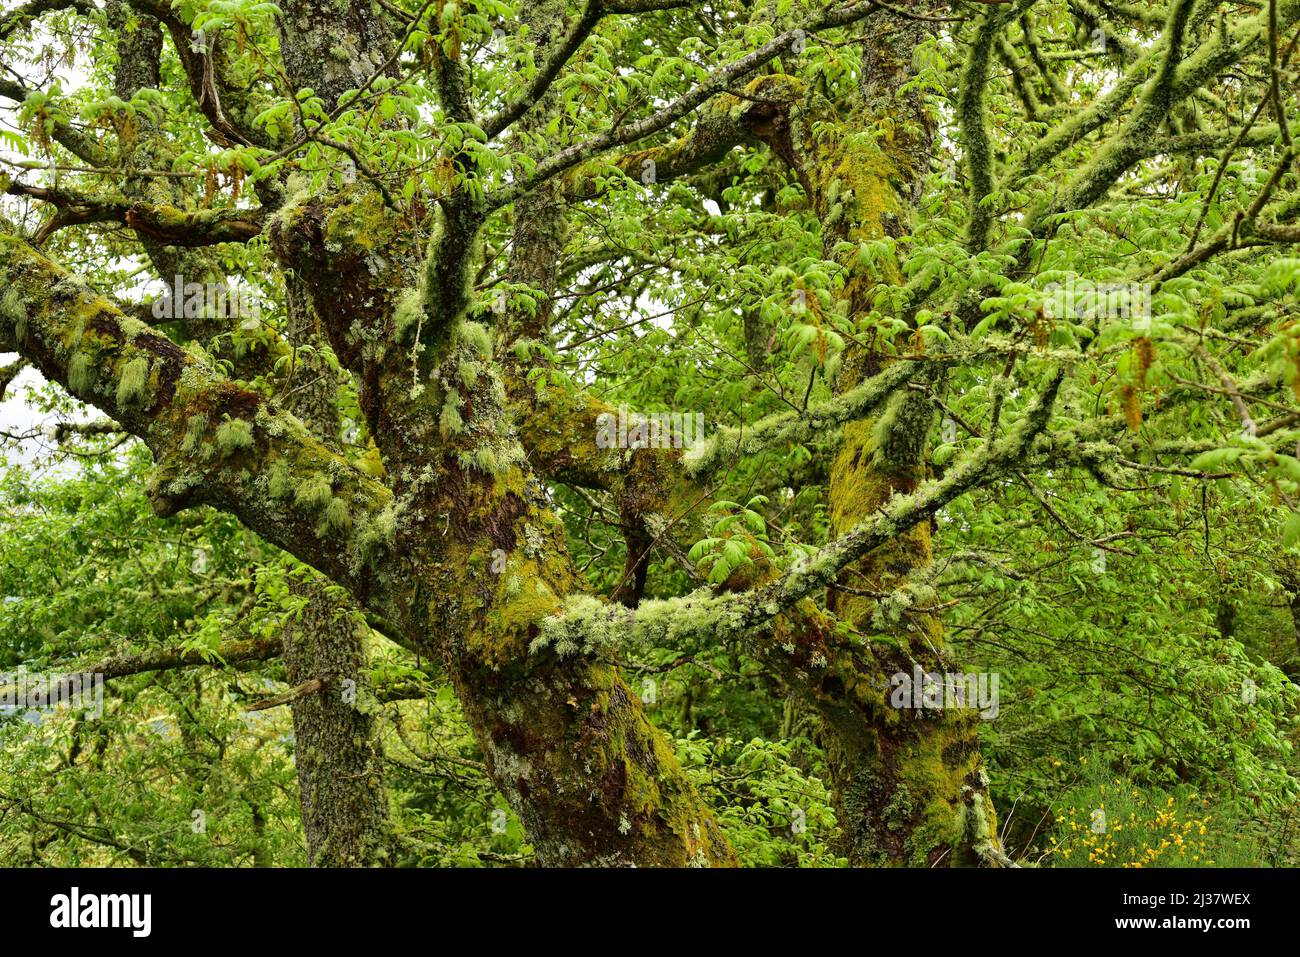 Pyrenean oak (Quercus pyrenaica) is a deciduous tree native to western Mediterranean basin (Iberian Peninsula, Western France and Morocco mountains). Stock Photo